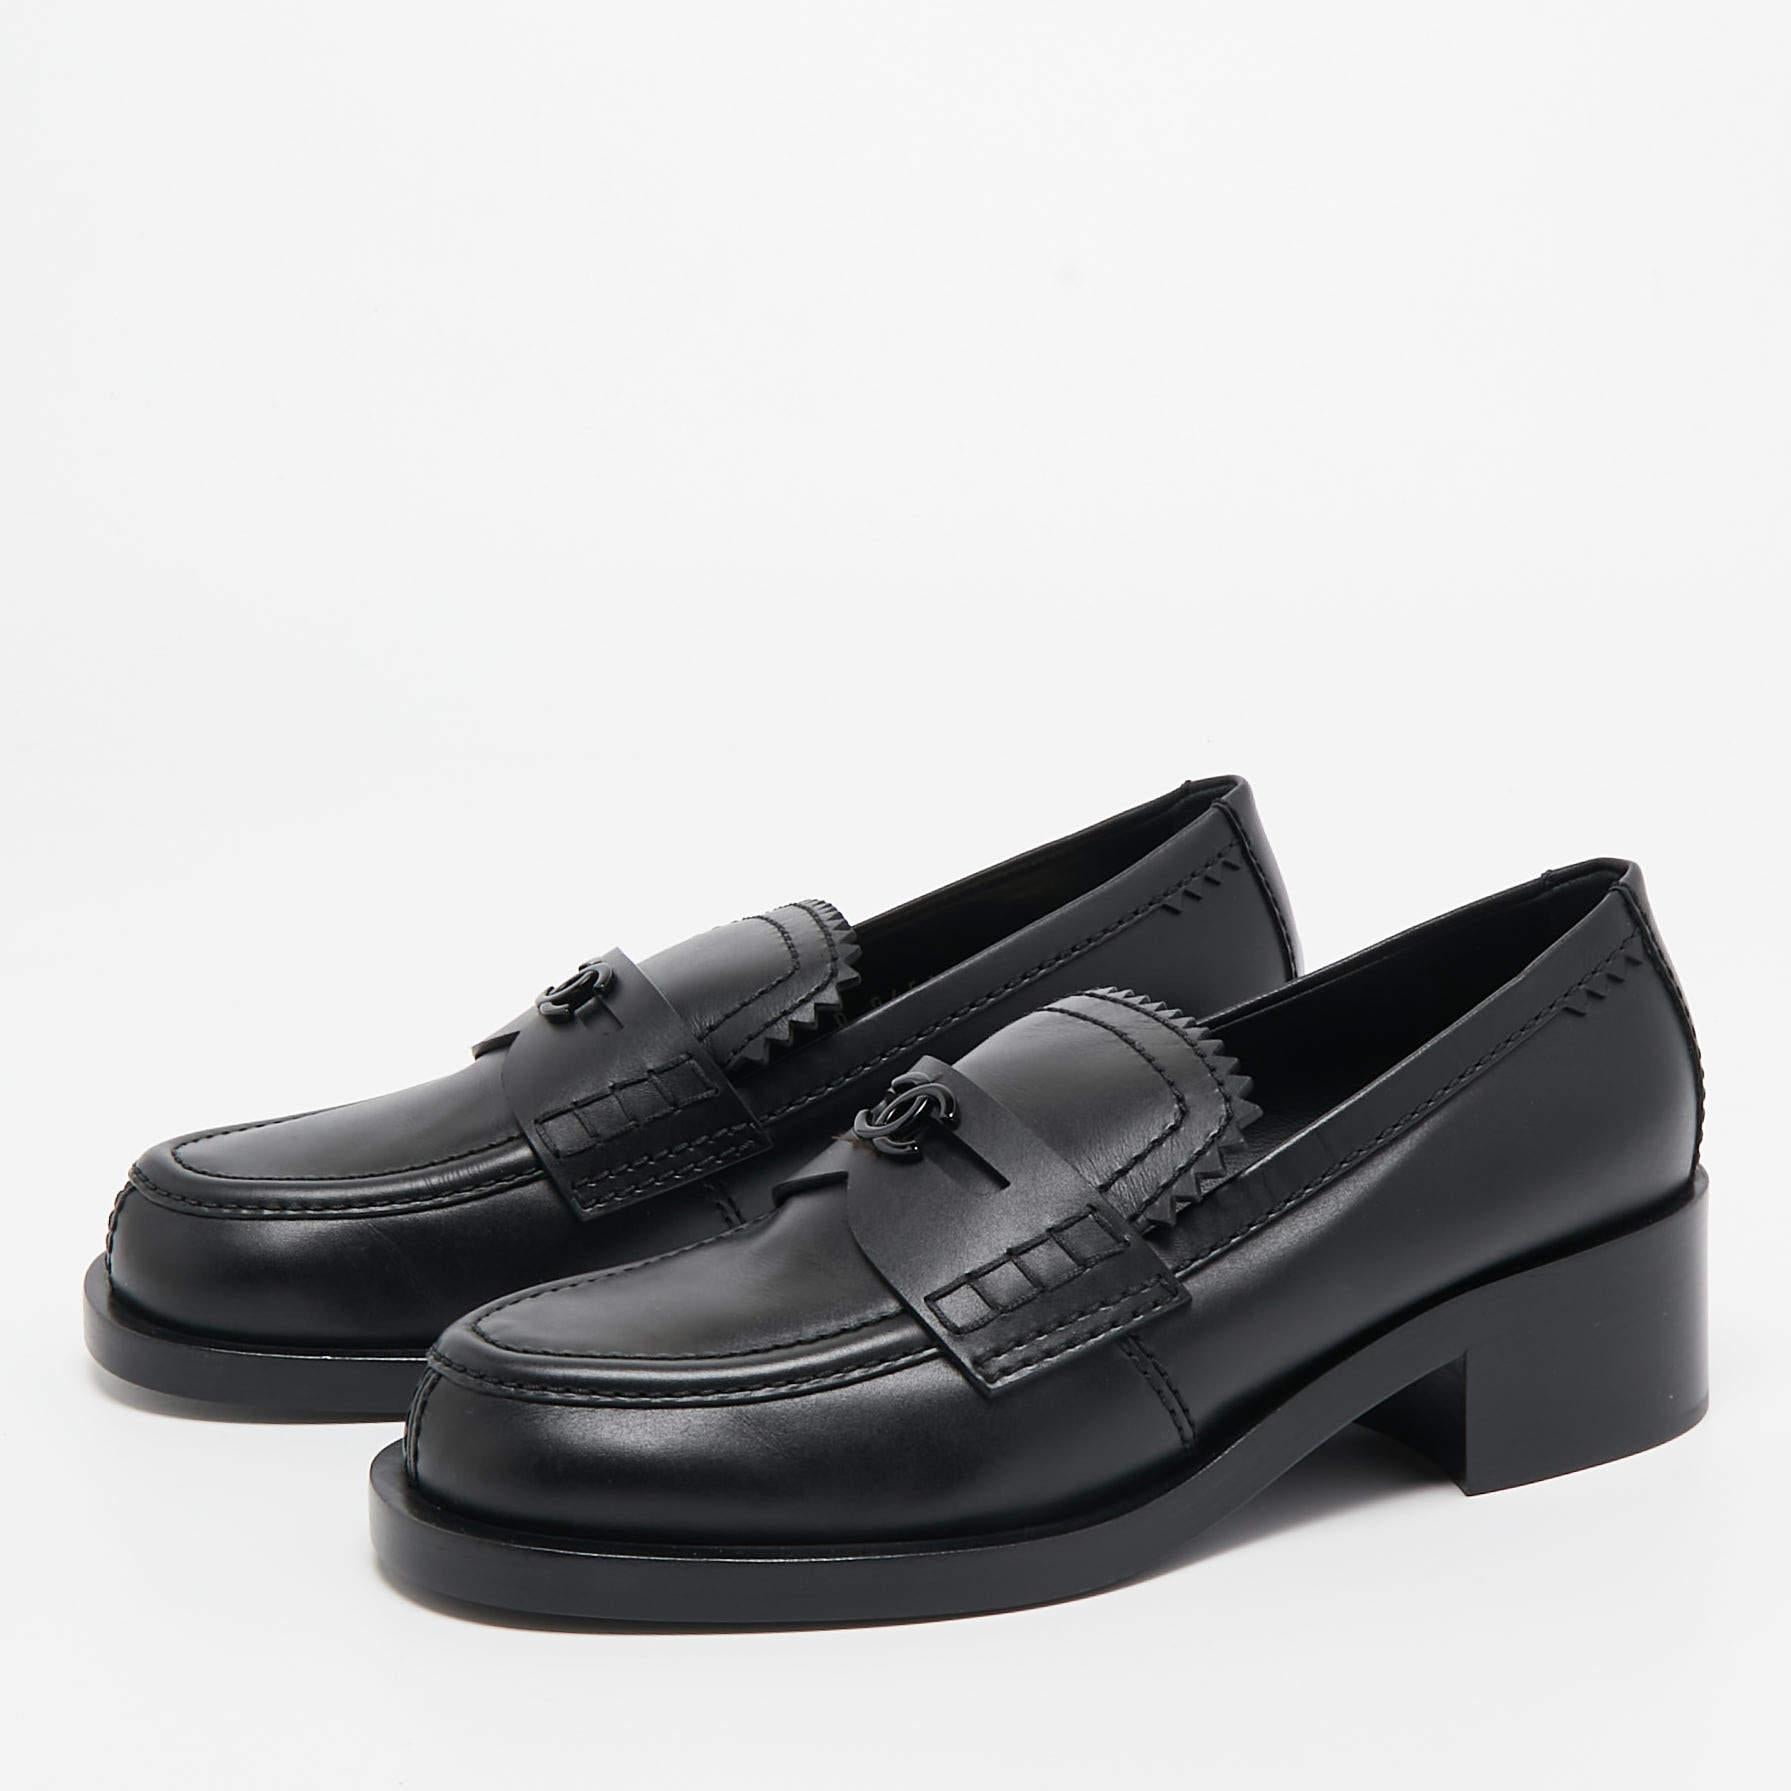 Chanel Black Leather Slip On Loafers Size 38.5 2